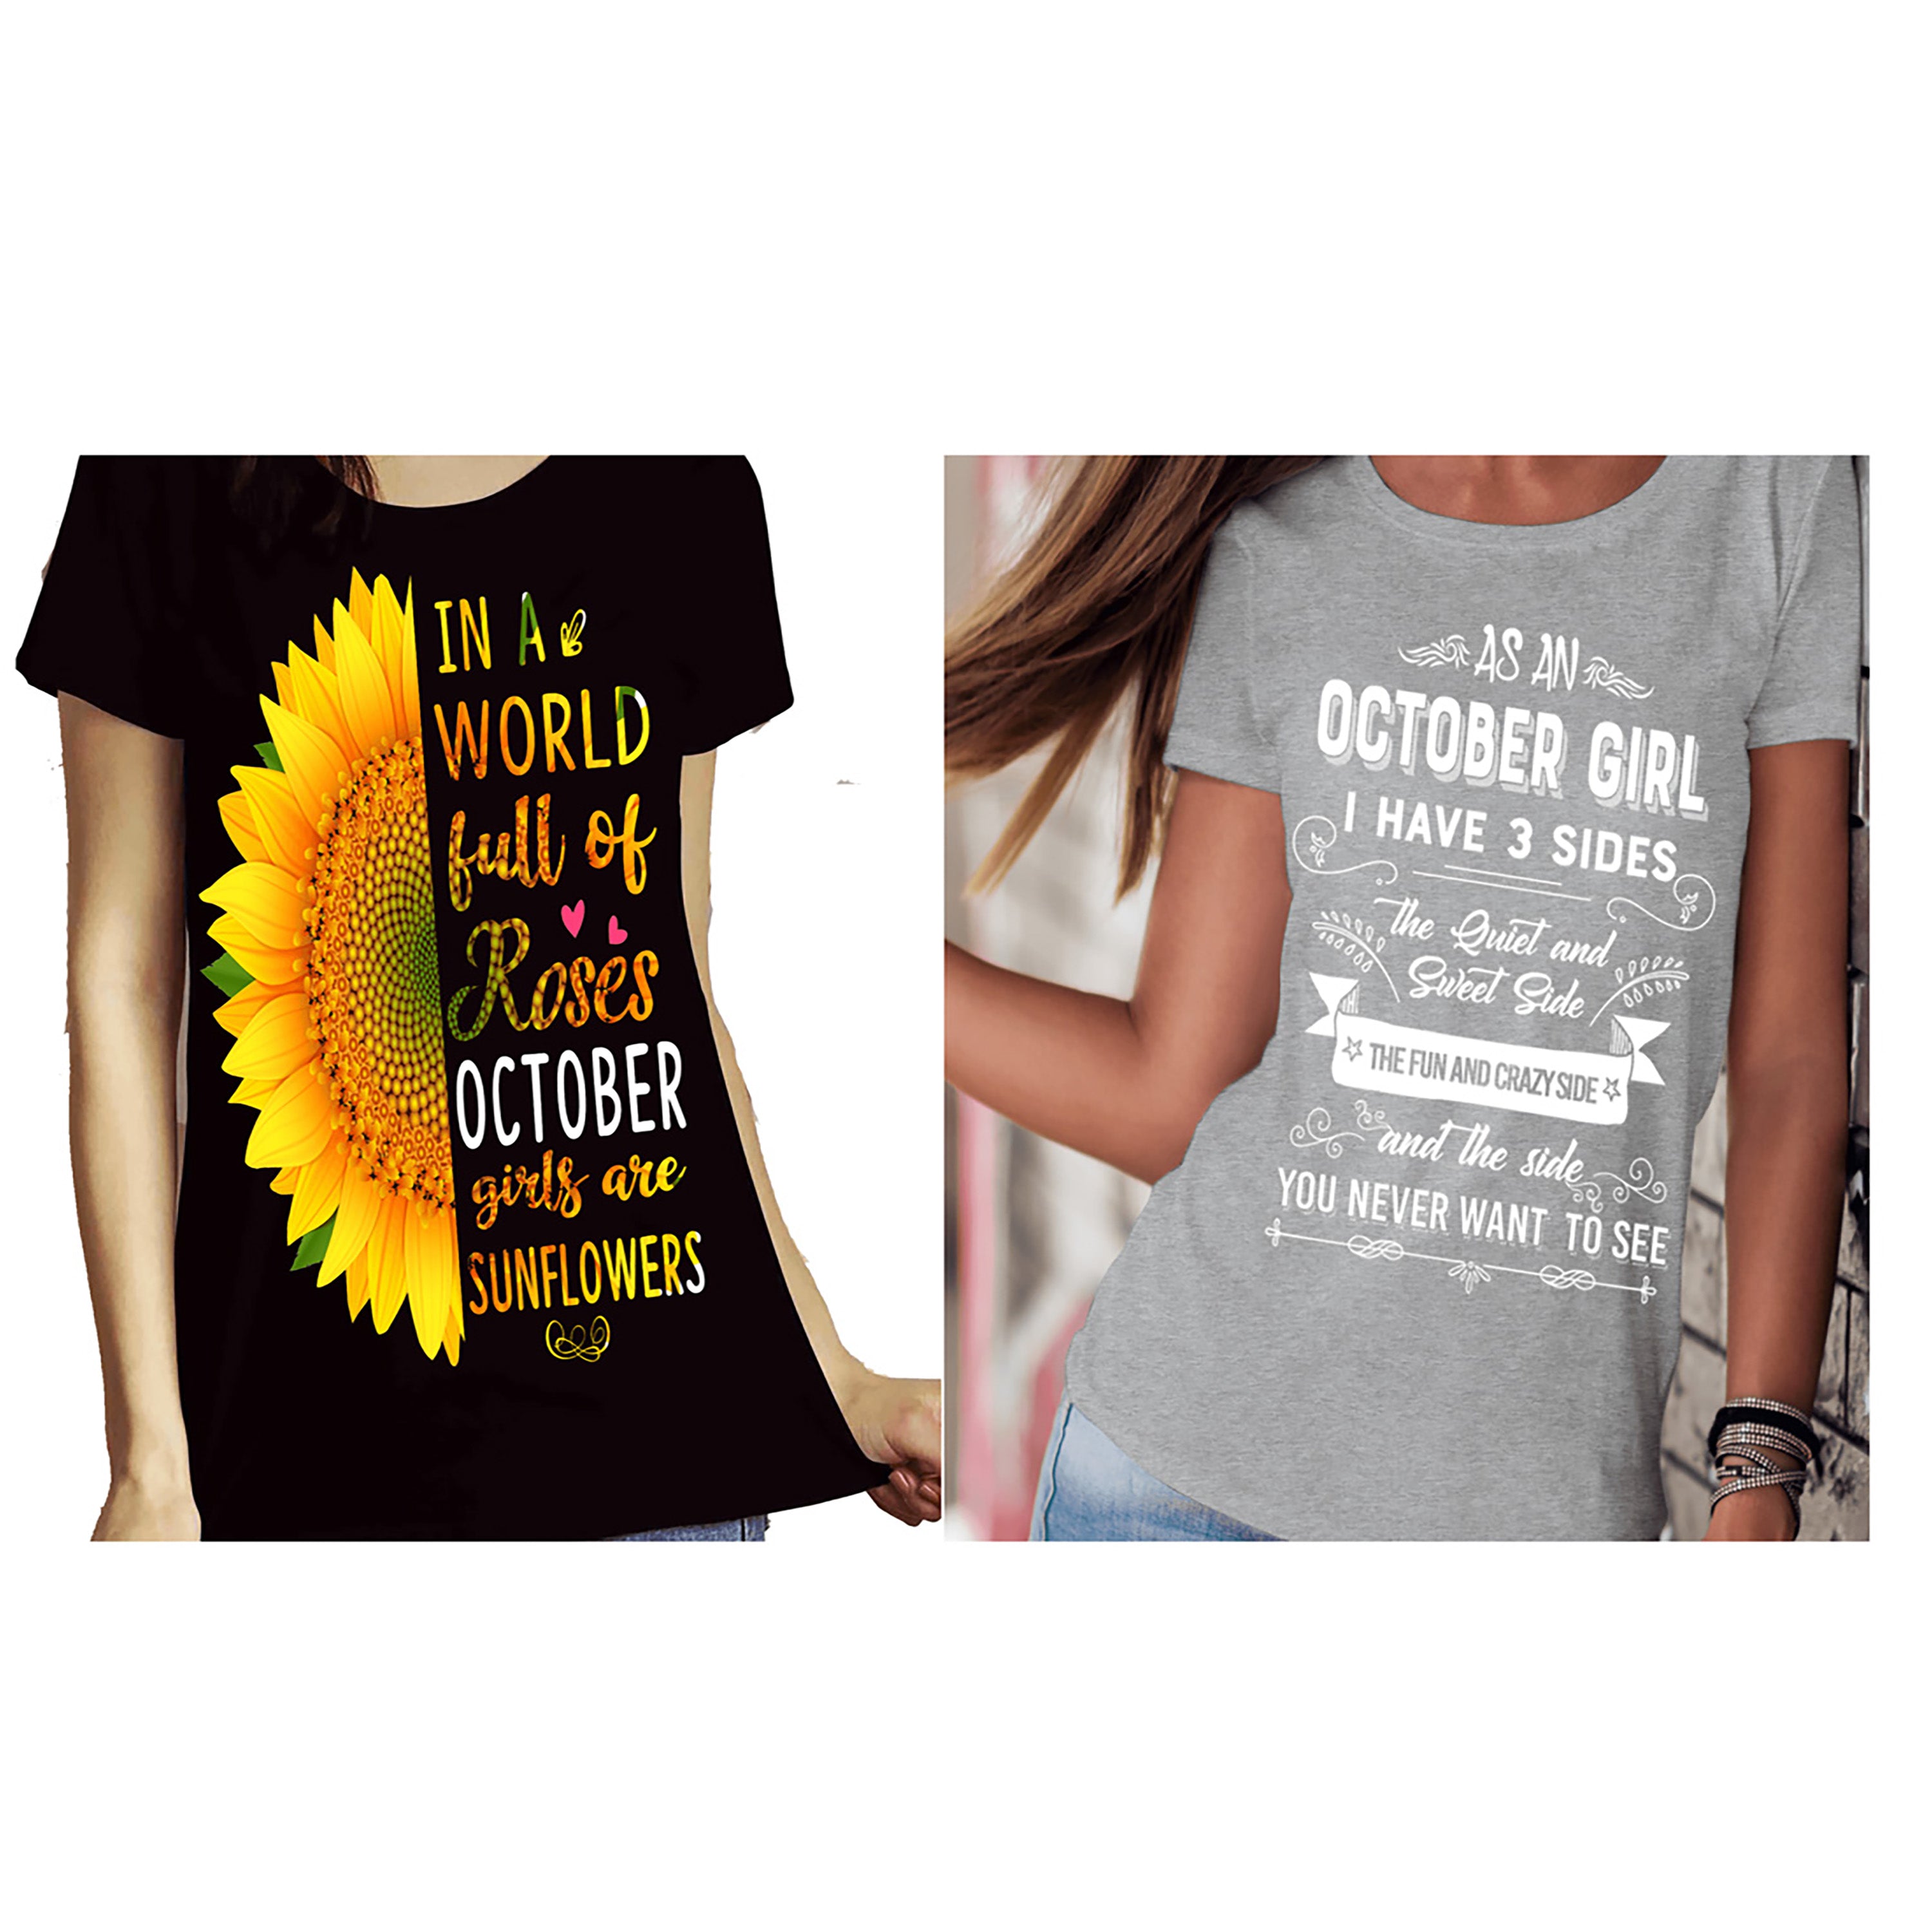 "October Combo (Sunflower And 3 Sides)" Pack of 2 Shirts